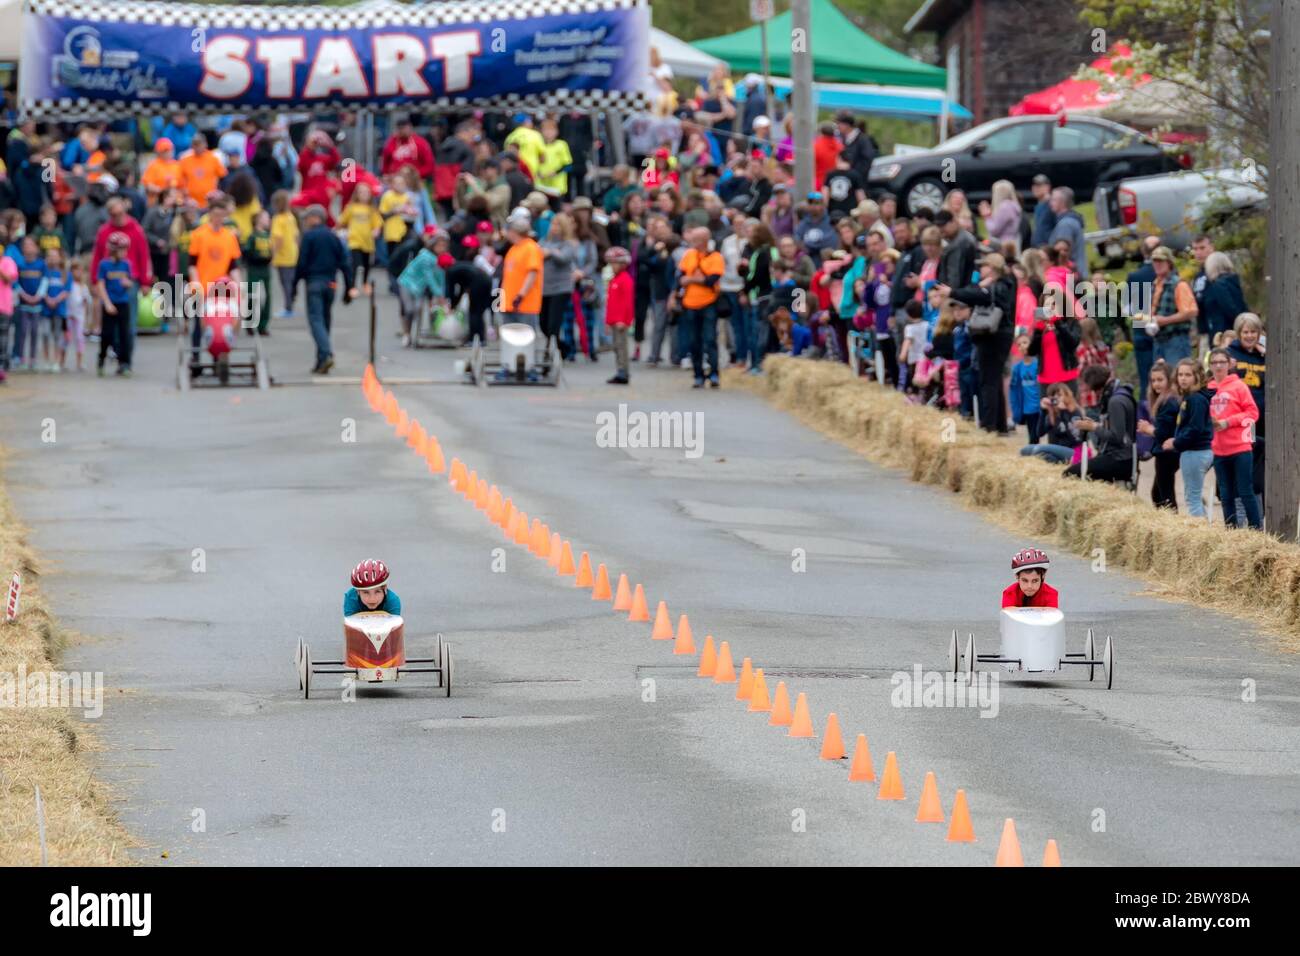 Saint John, New Brunswick, Canada - May 26, 2018: Unidentified children participate in the annual soap box derby while spectators watch . Stock Photo